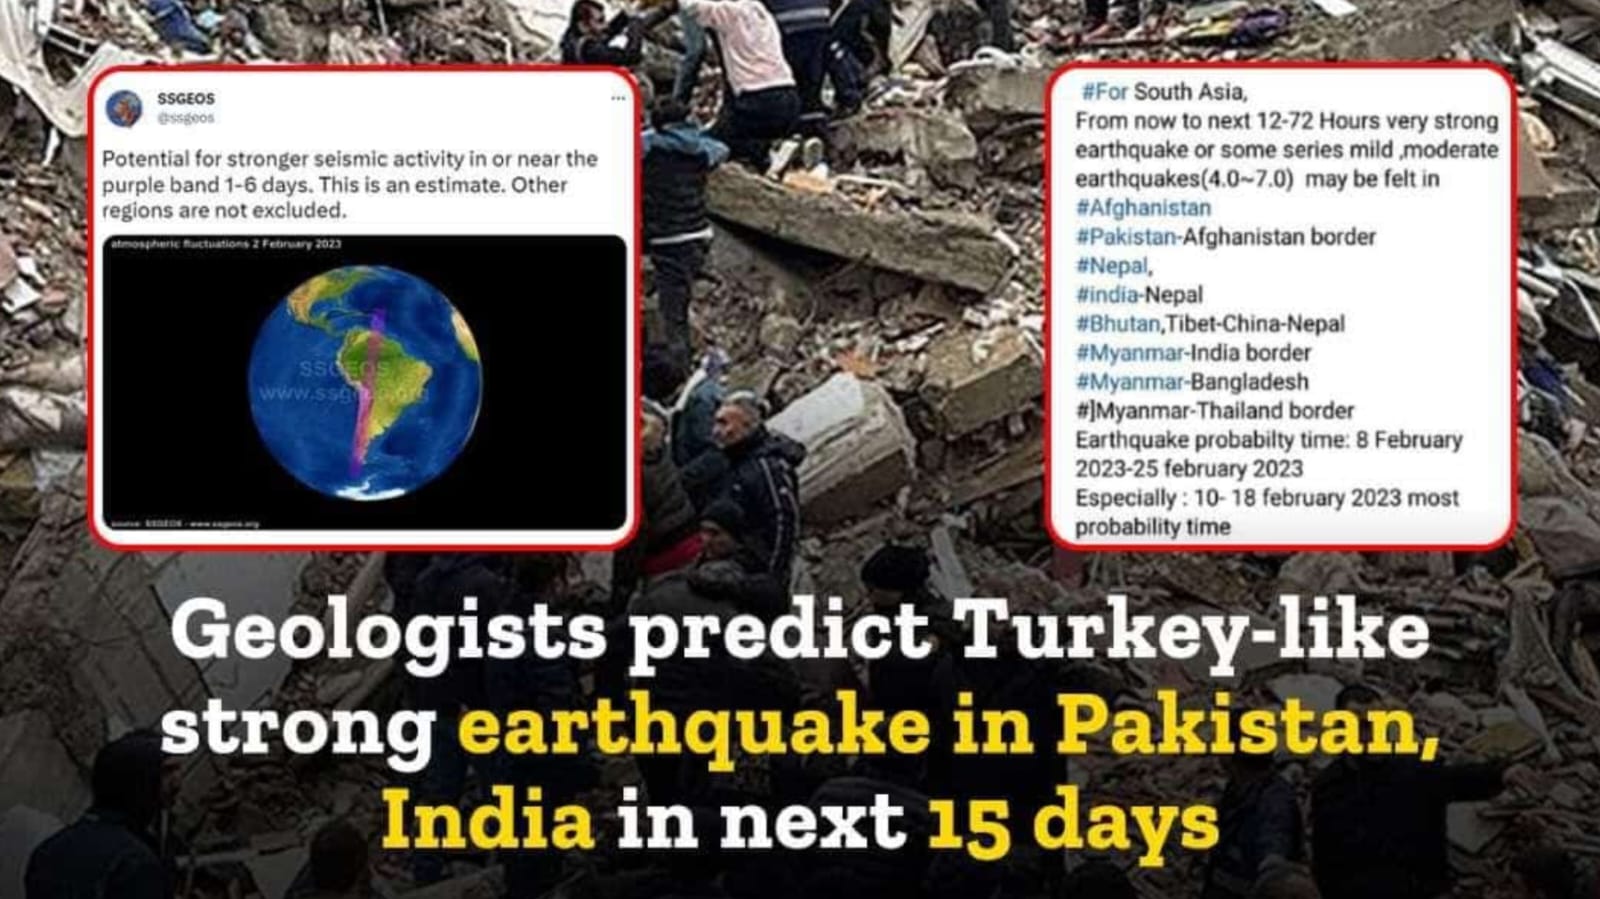 IndiaPakistan to Experience a TurkeyLike Earthquake in the Next 15